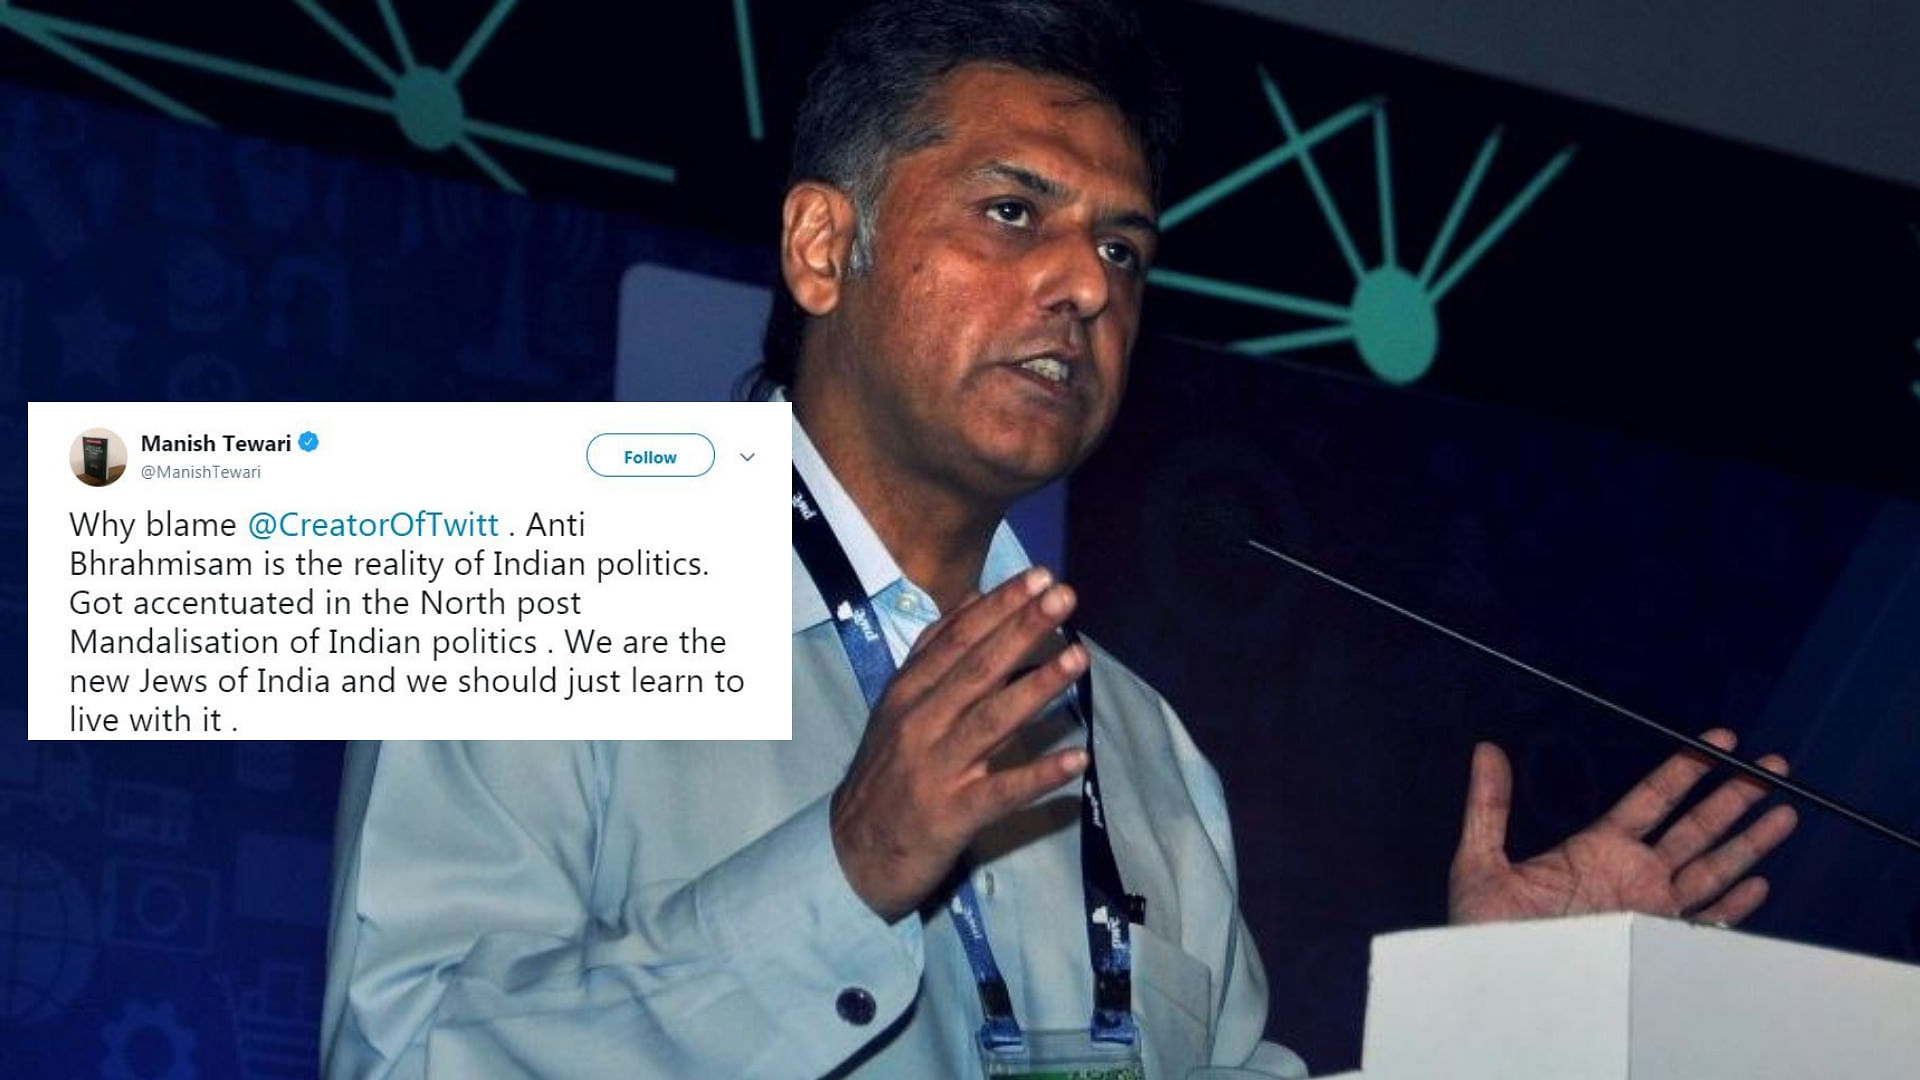 Congress spokesperson Manish Tiwari compared the state of Brahmins in India to that of the Jews.